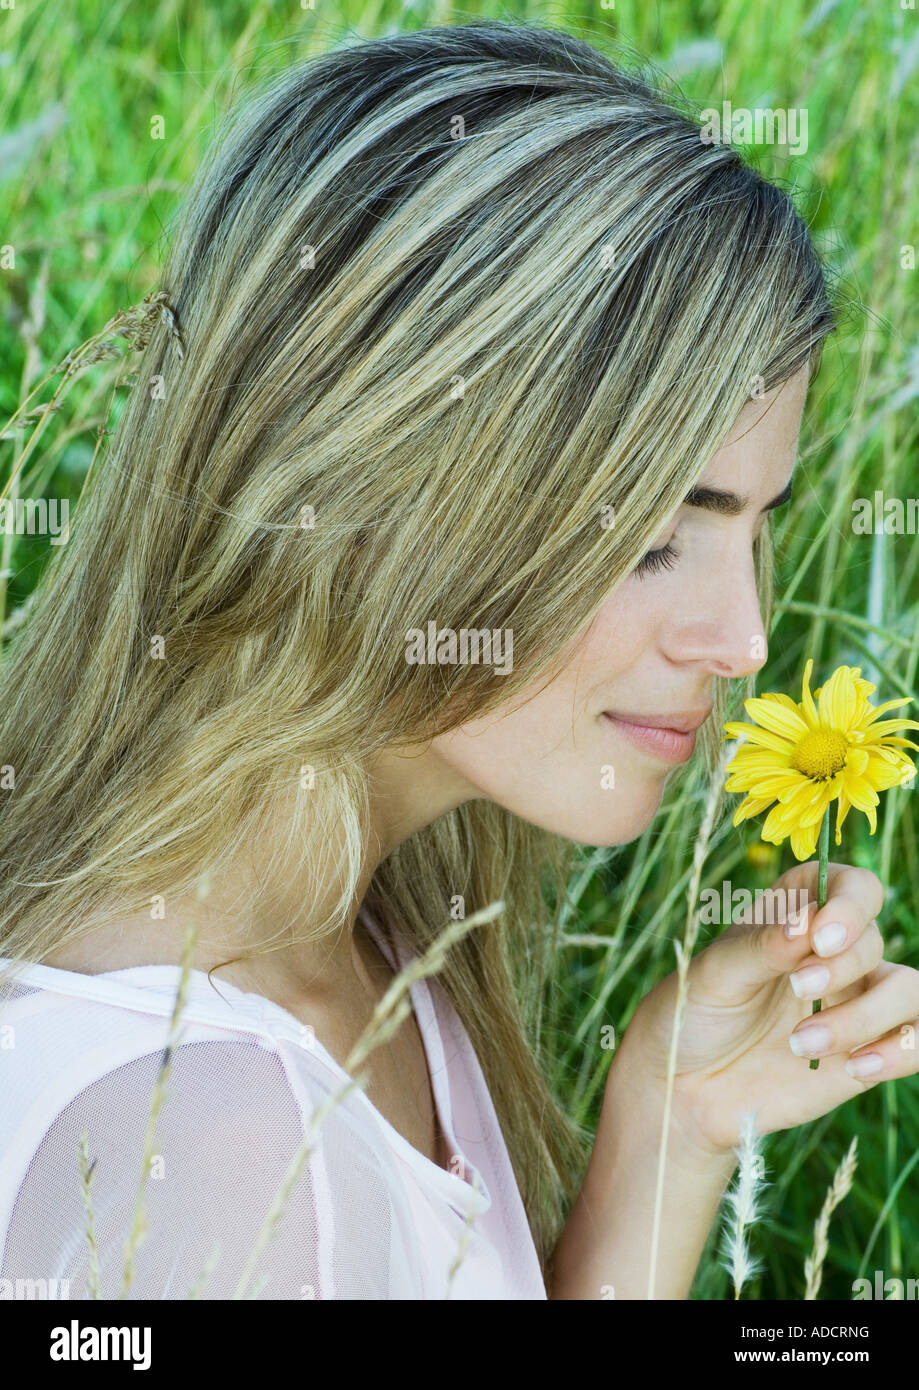 Woman smelling flower Stock Photo